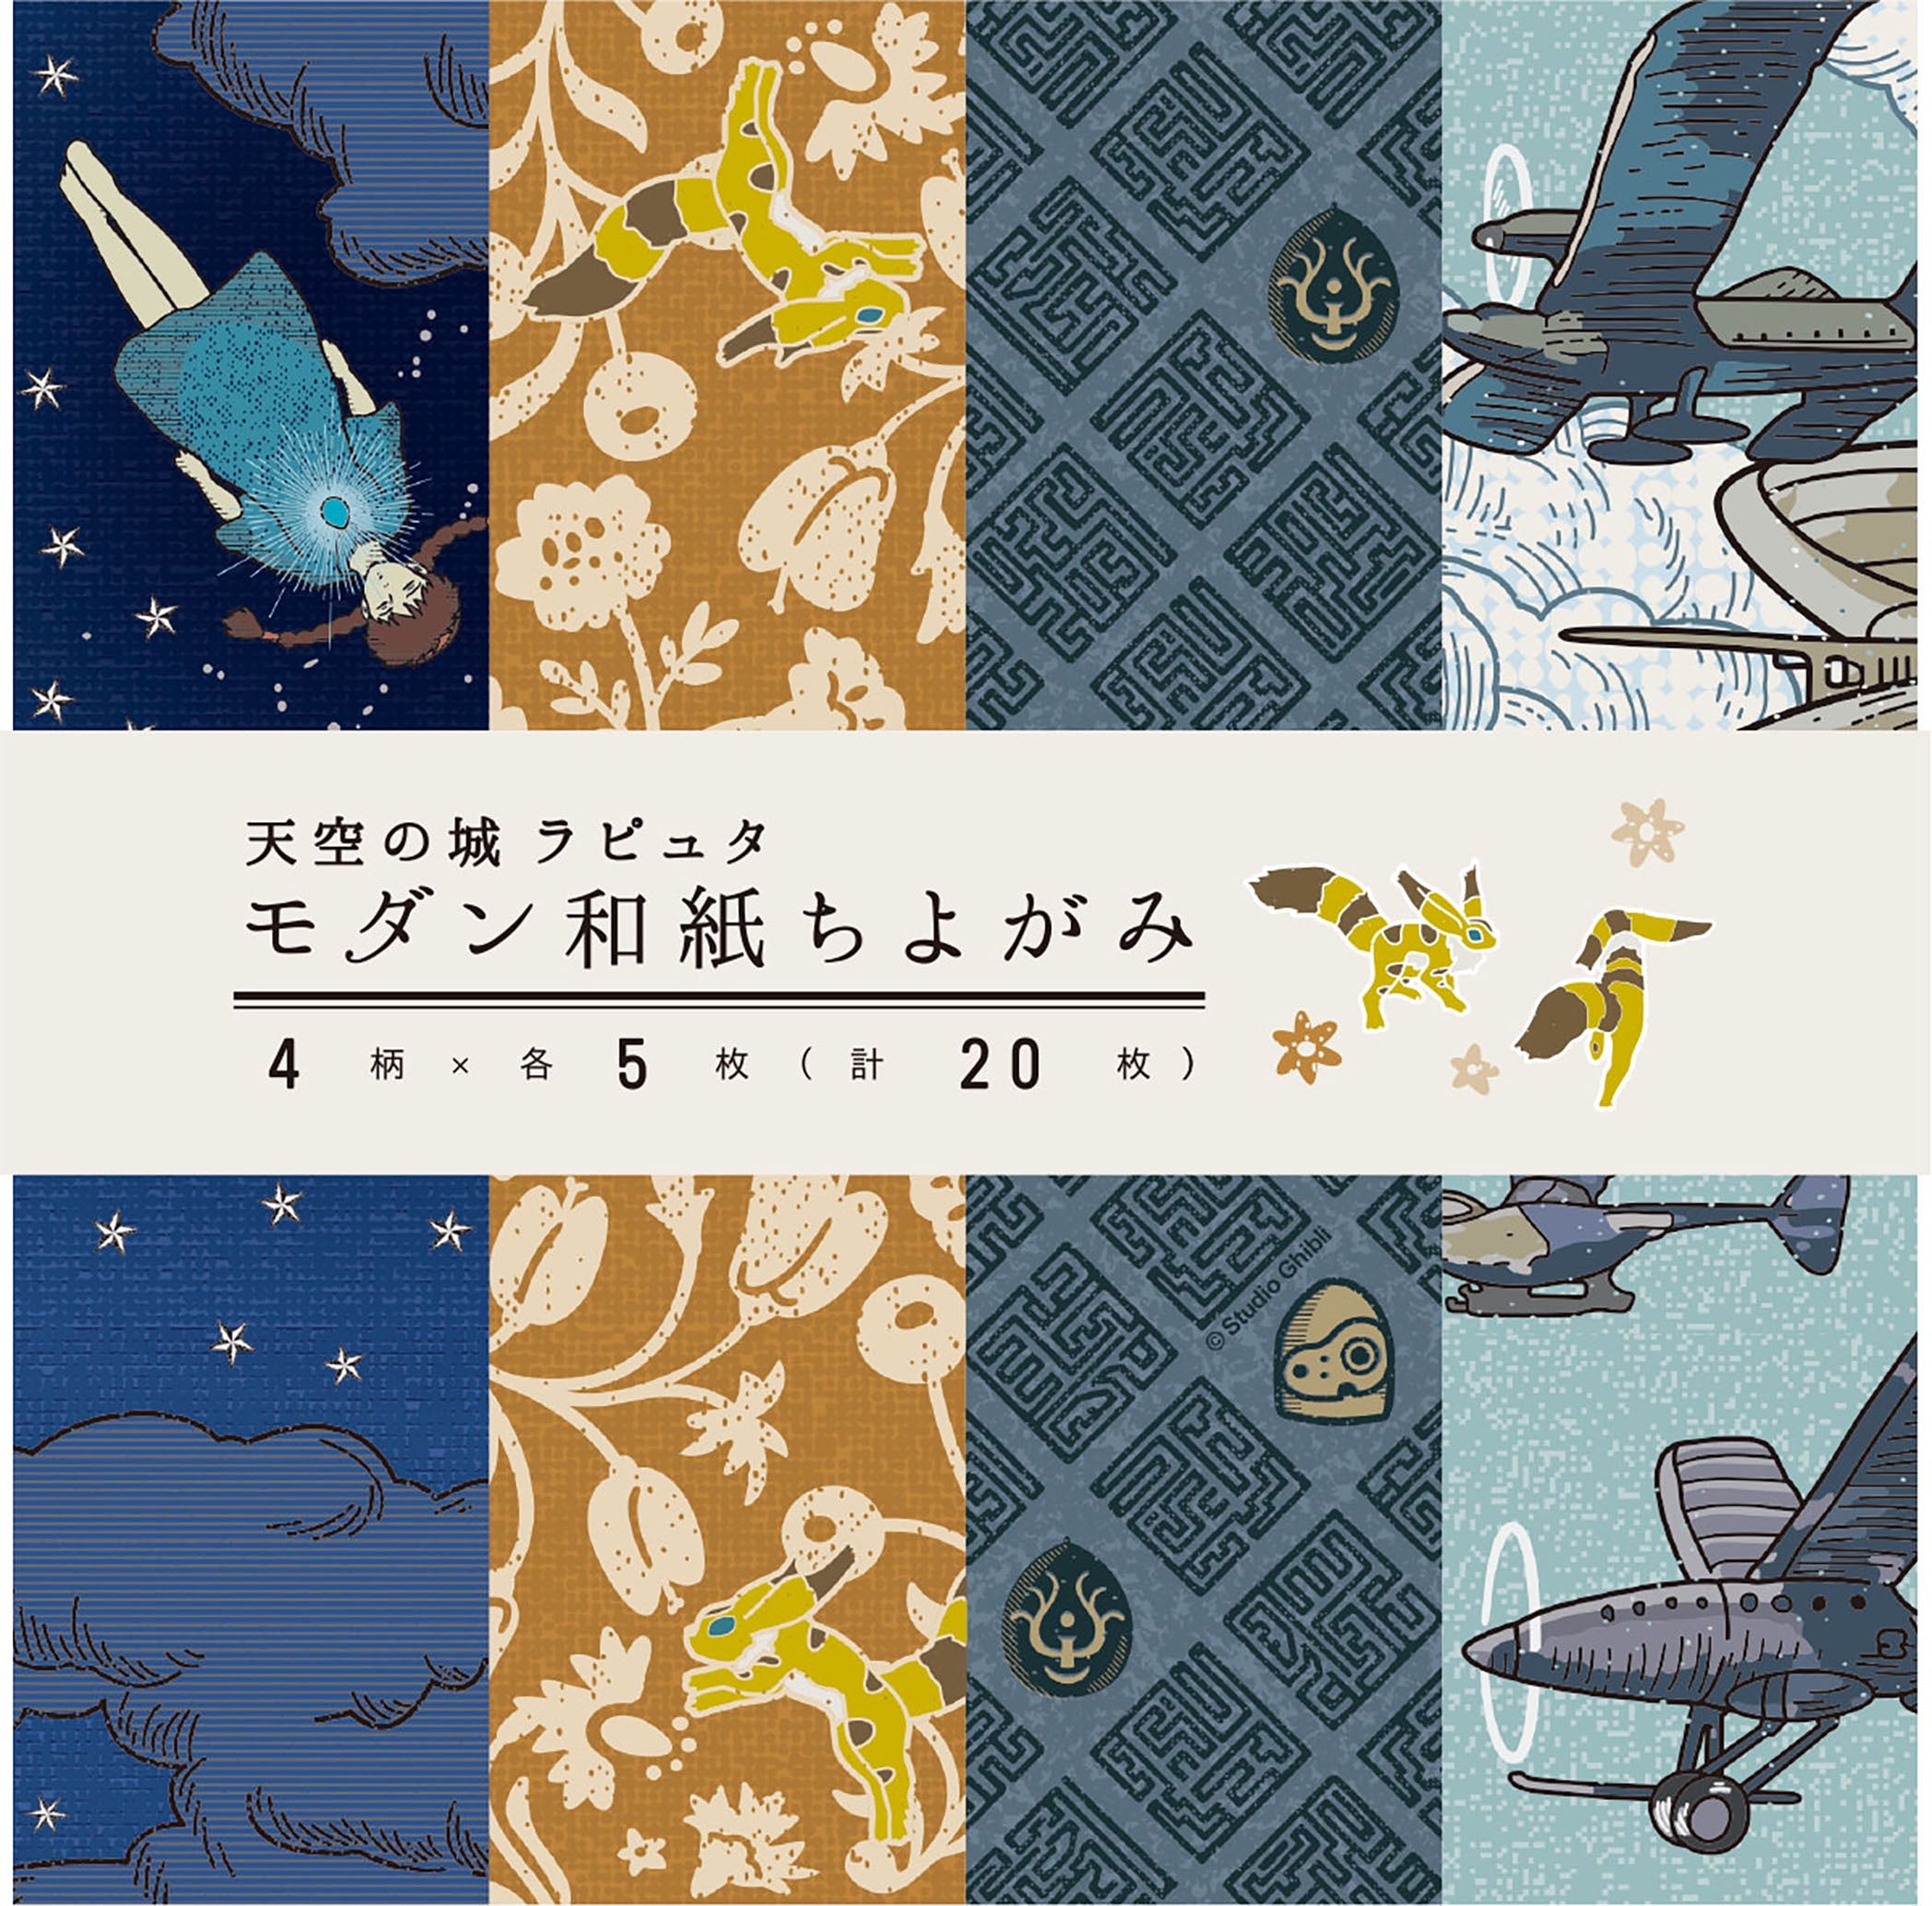 Ensky Origami Paper - Castle in the Sky Chiyomi Paper